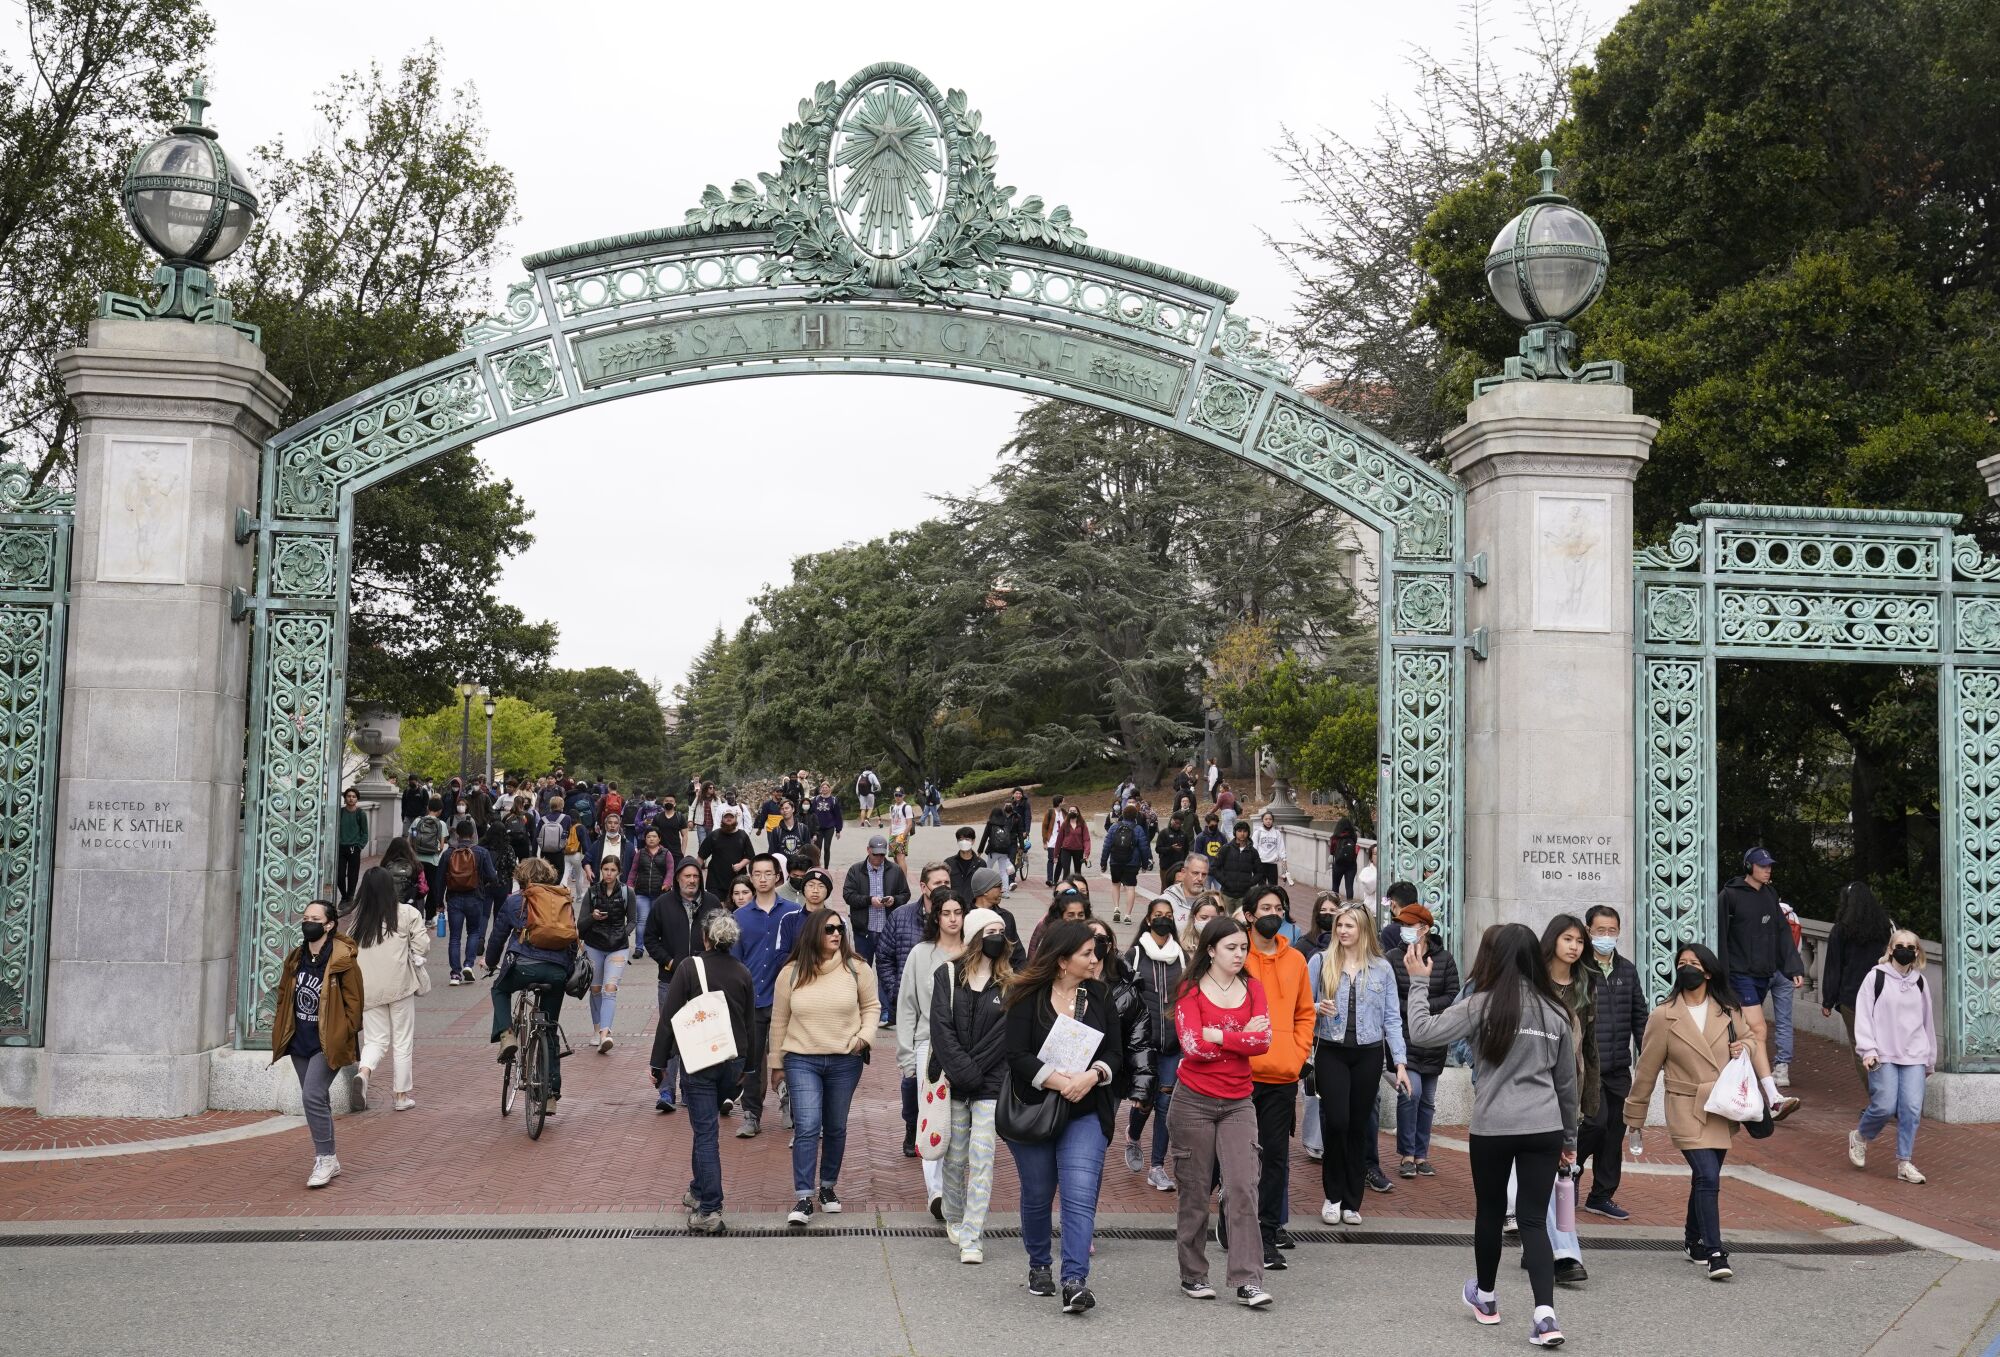 Students make their way through the Sather Gate near Sproul Plaza on the University of California, Berkeley, campus.